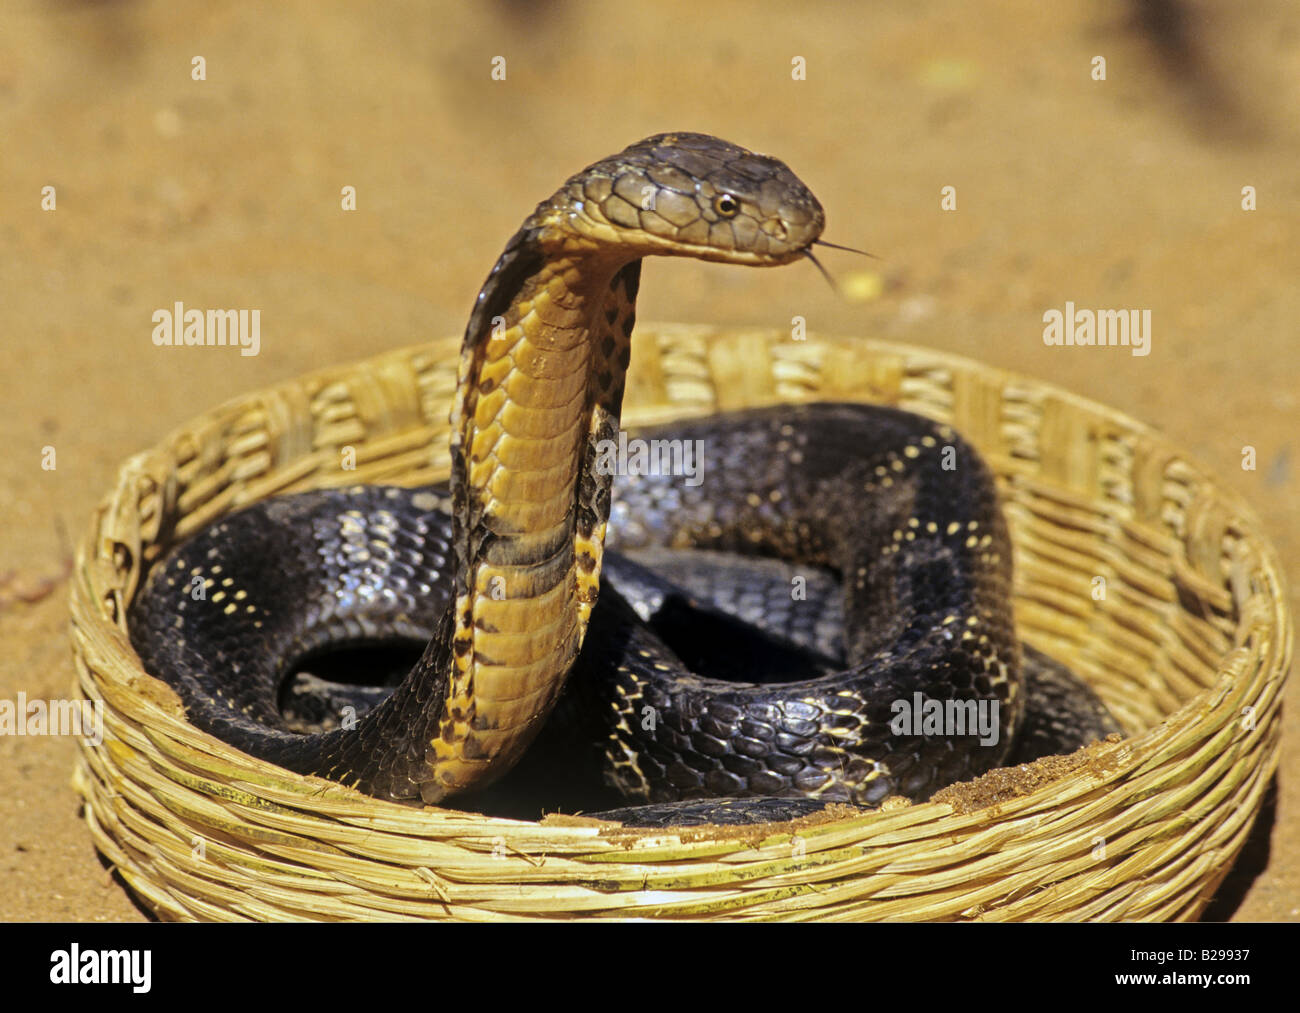 King Cobra Goa State India Date 15 06 2008 Ref ZB548 115573 0101 COMPULSORY CREDIT World Pictures Photoshot Stock Photo